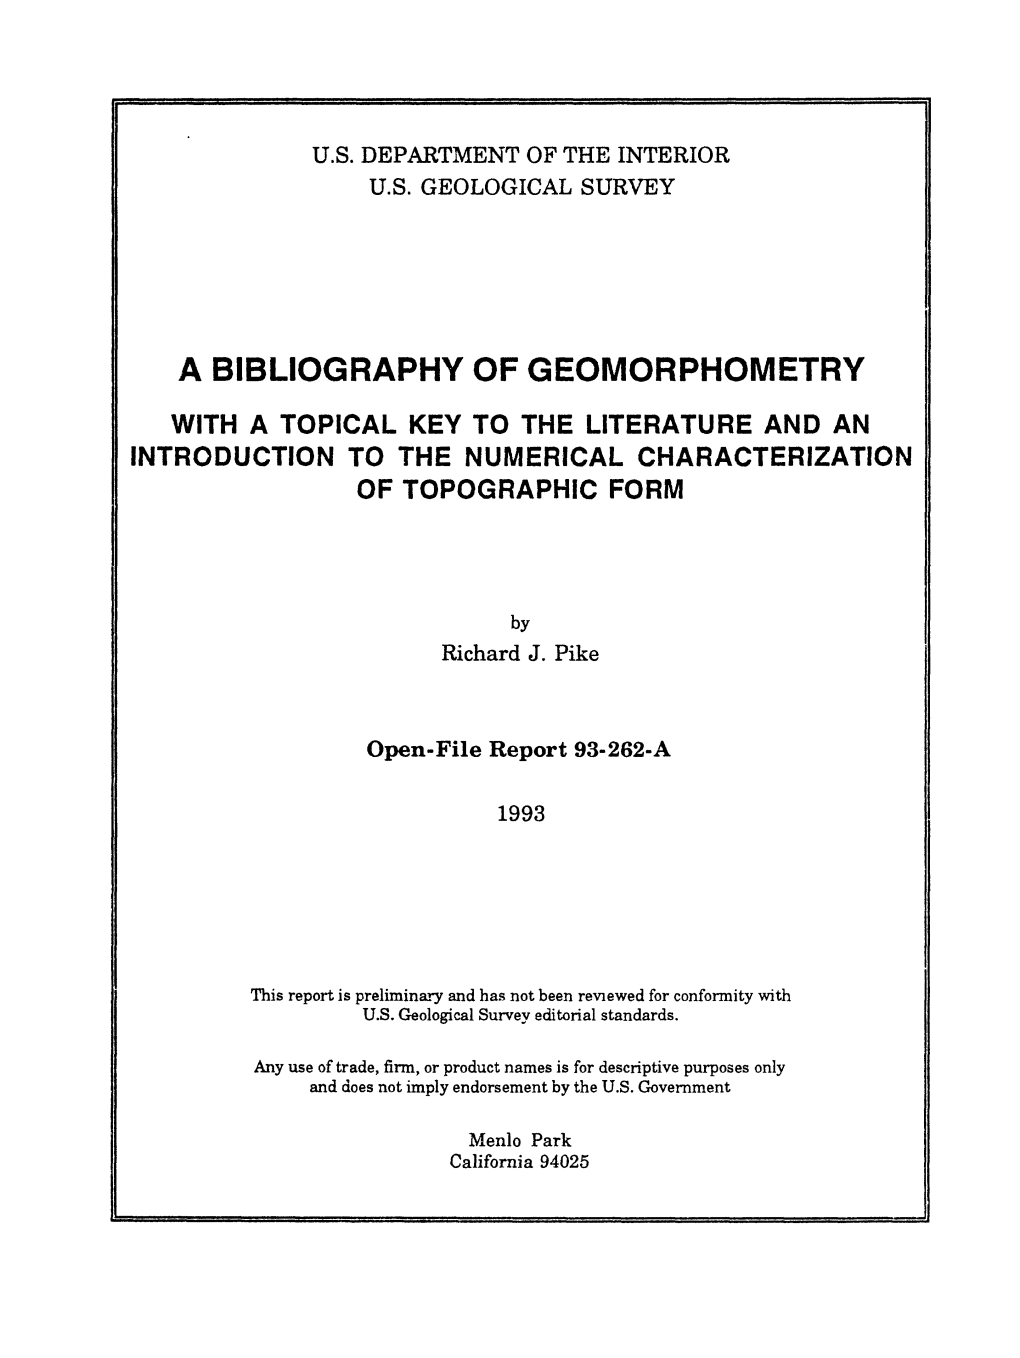 A Bibliography of Geomorphometry